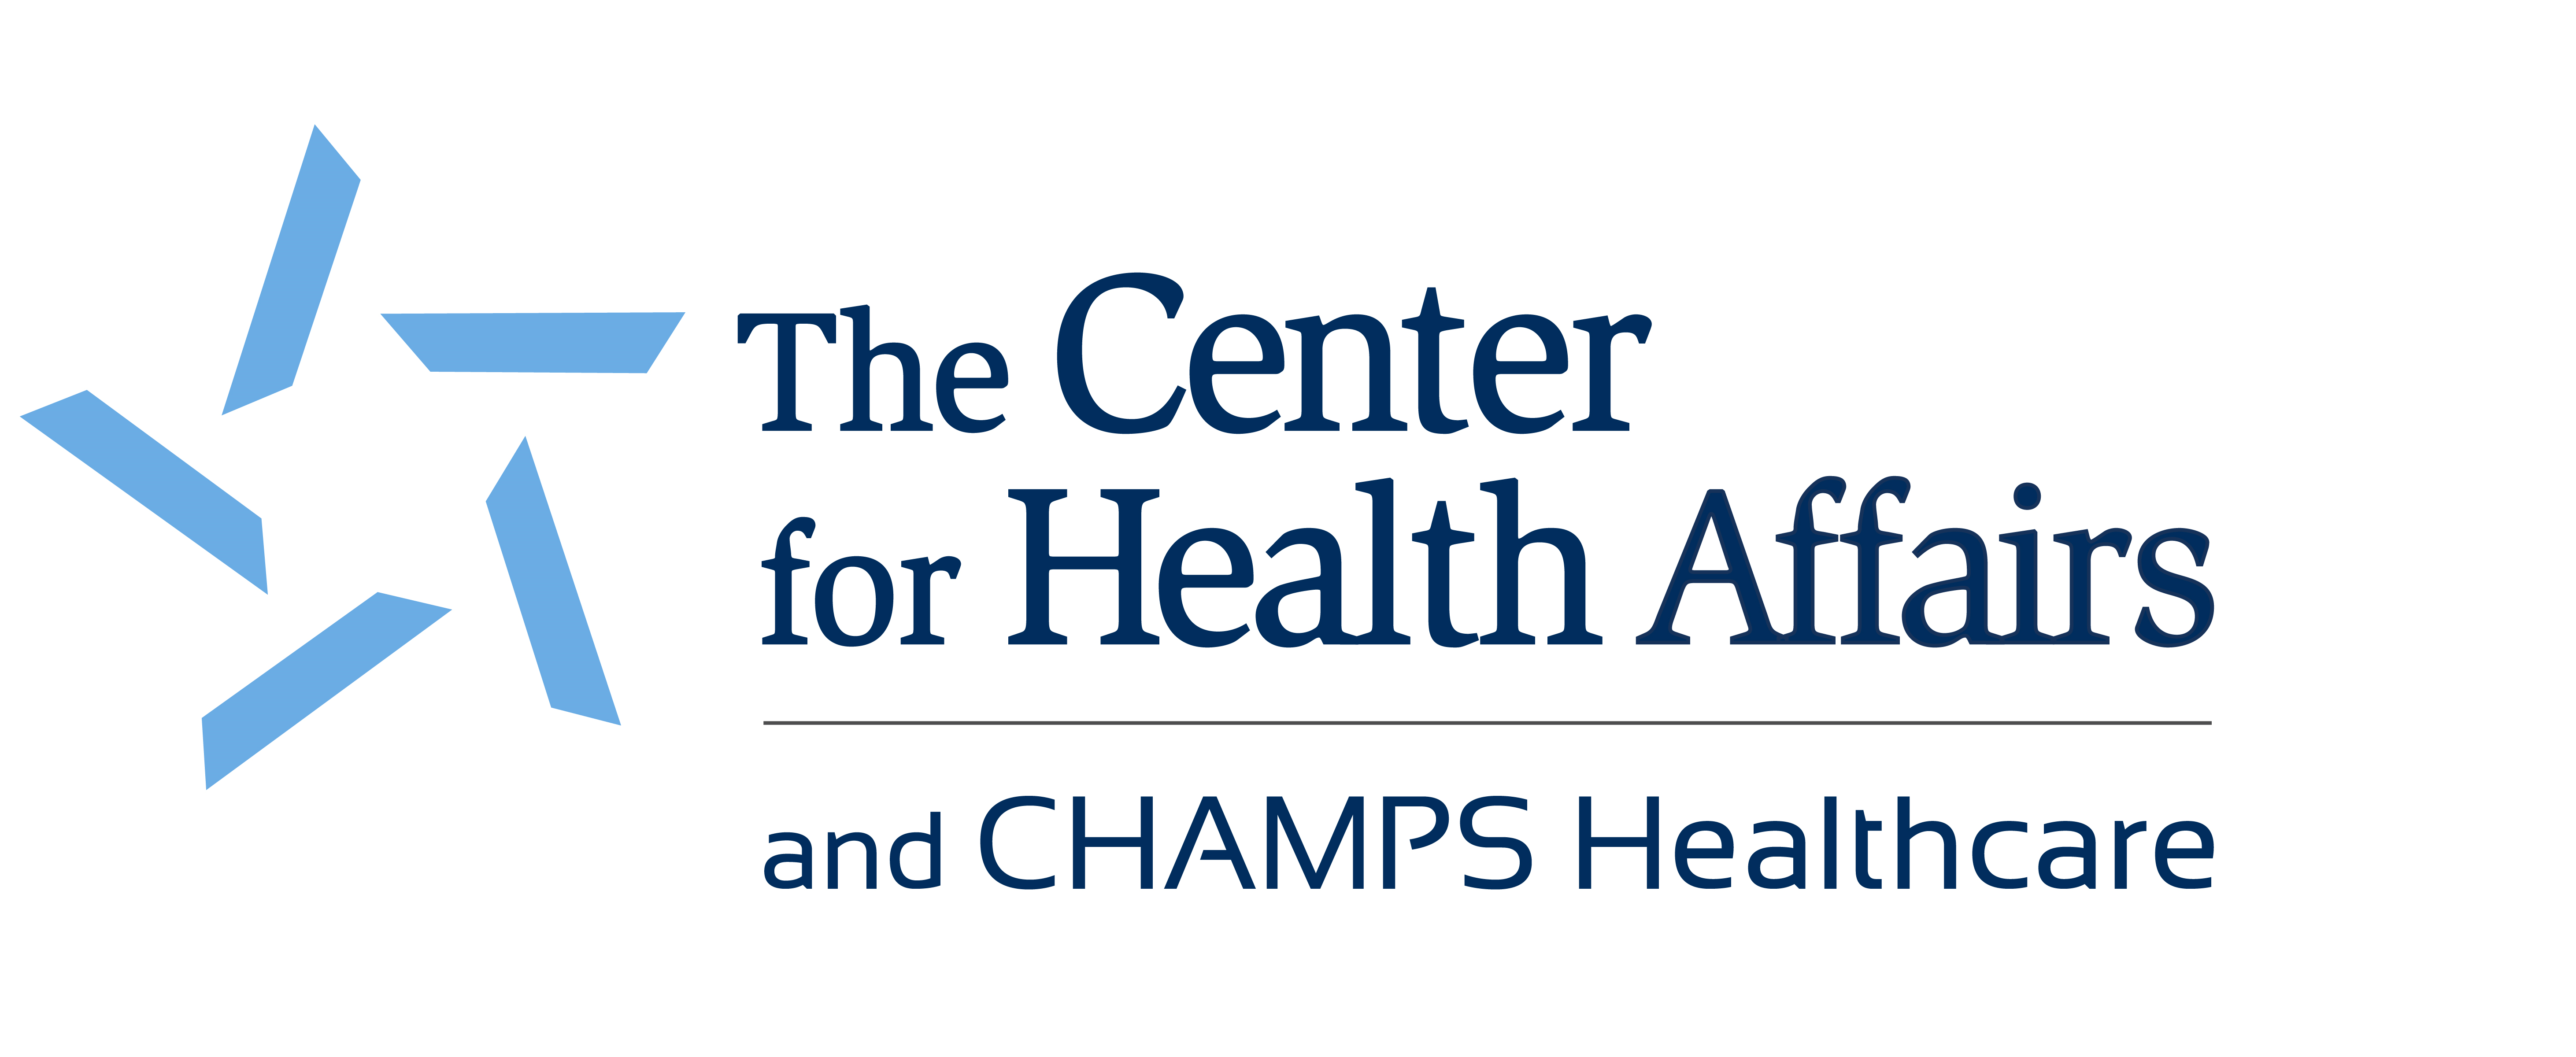 The Center for Health Affairs & CHAMPS Healthcare logo